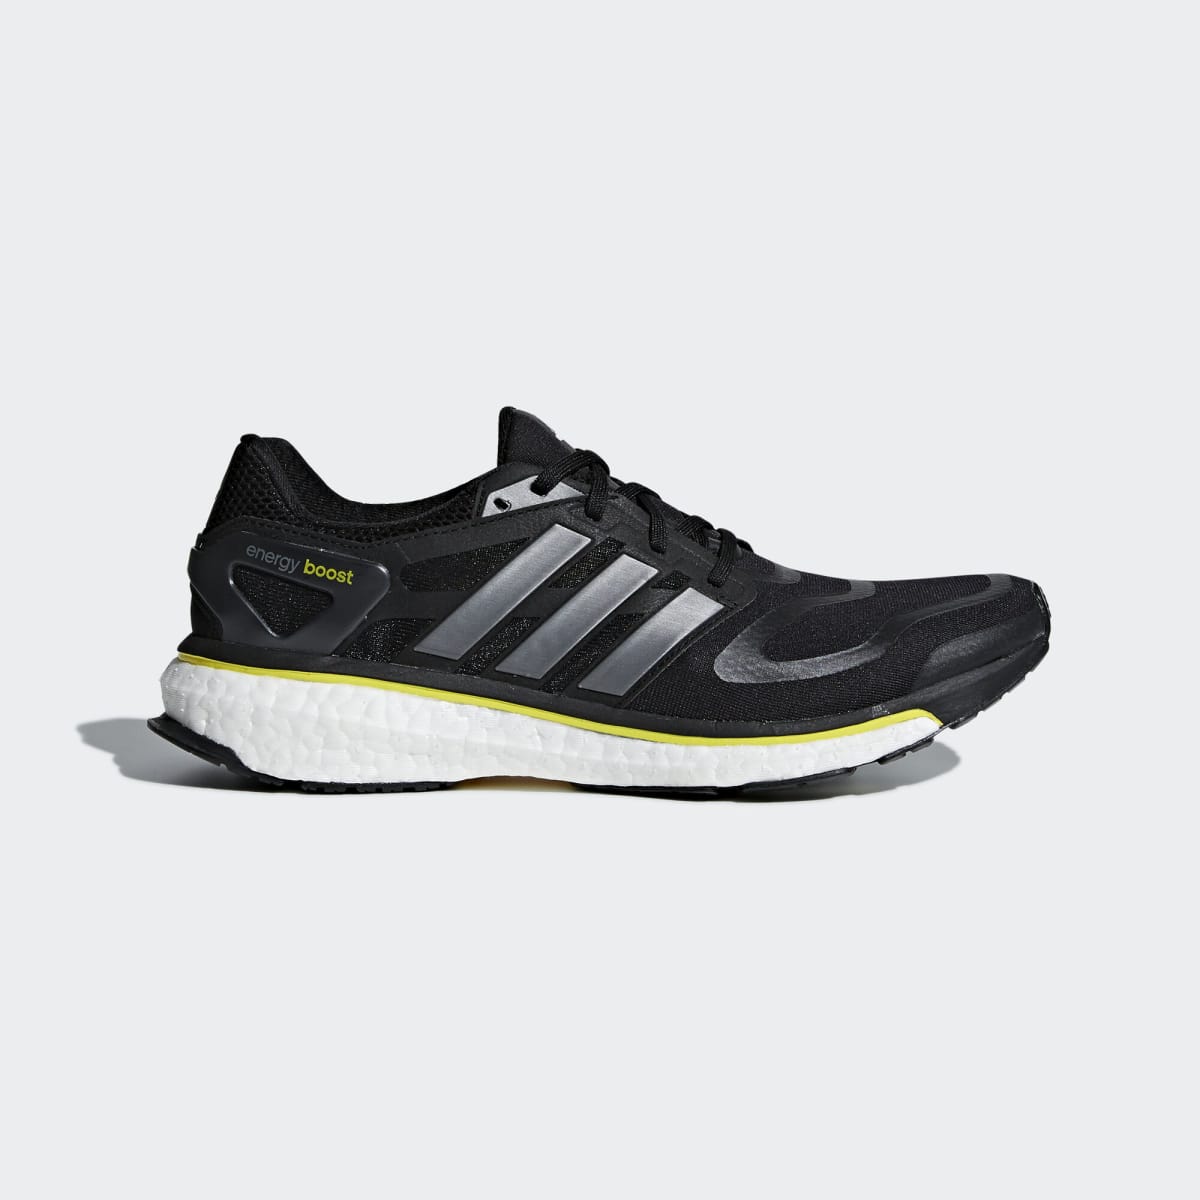 adidas energy boost shoes price